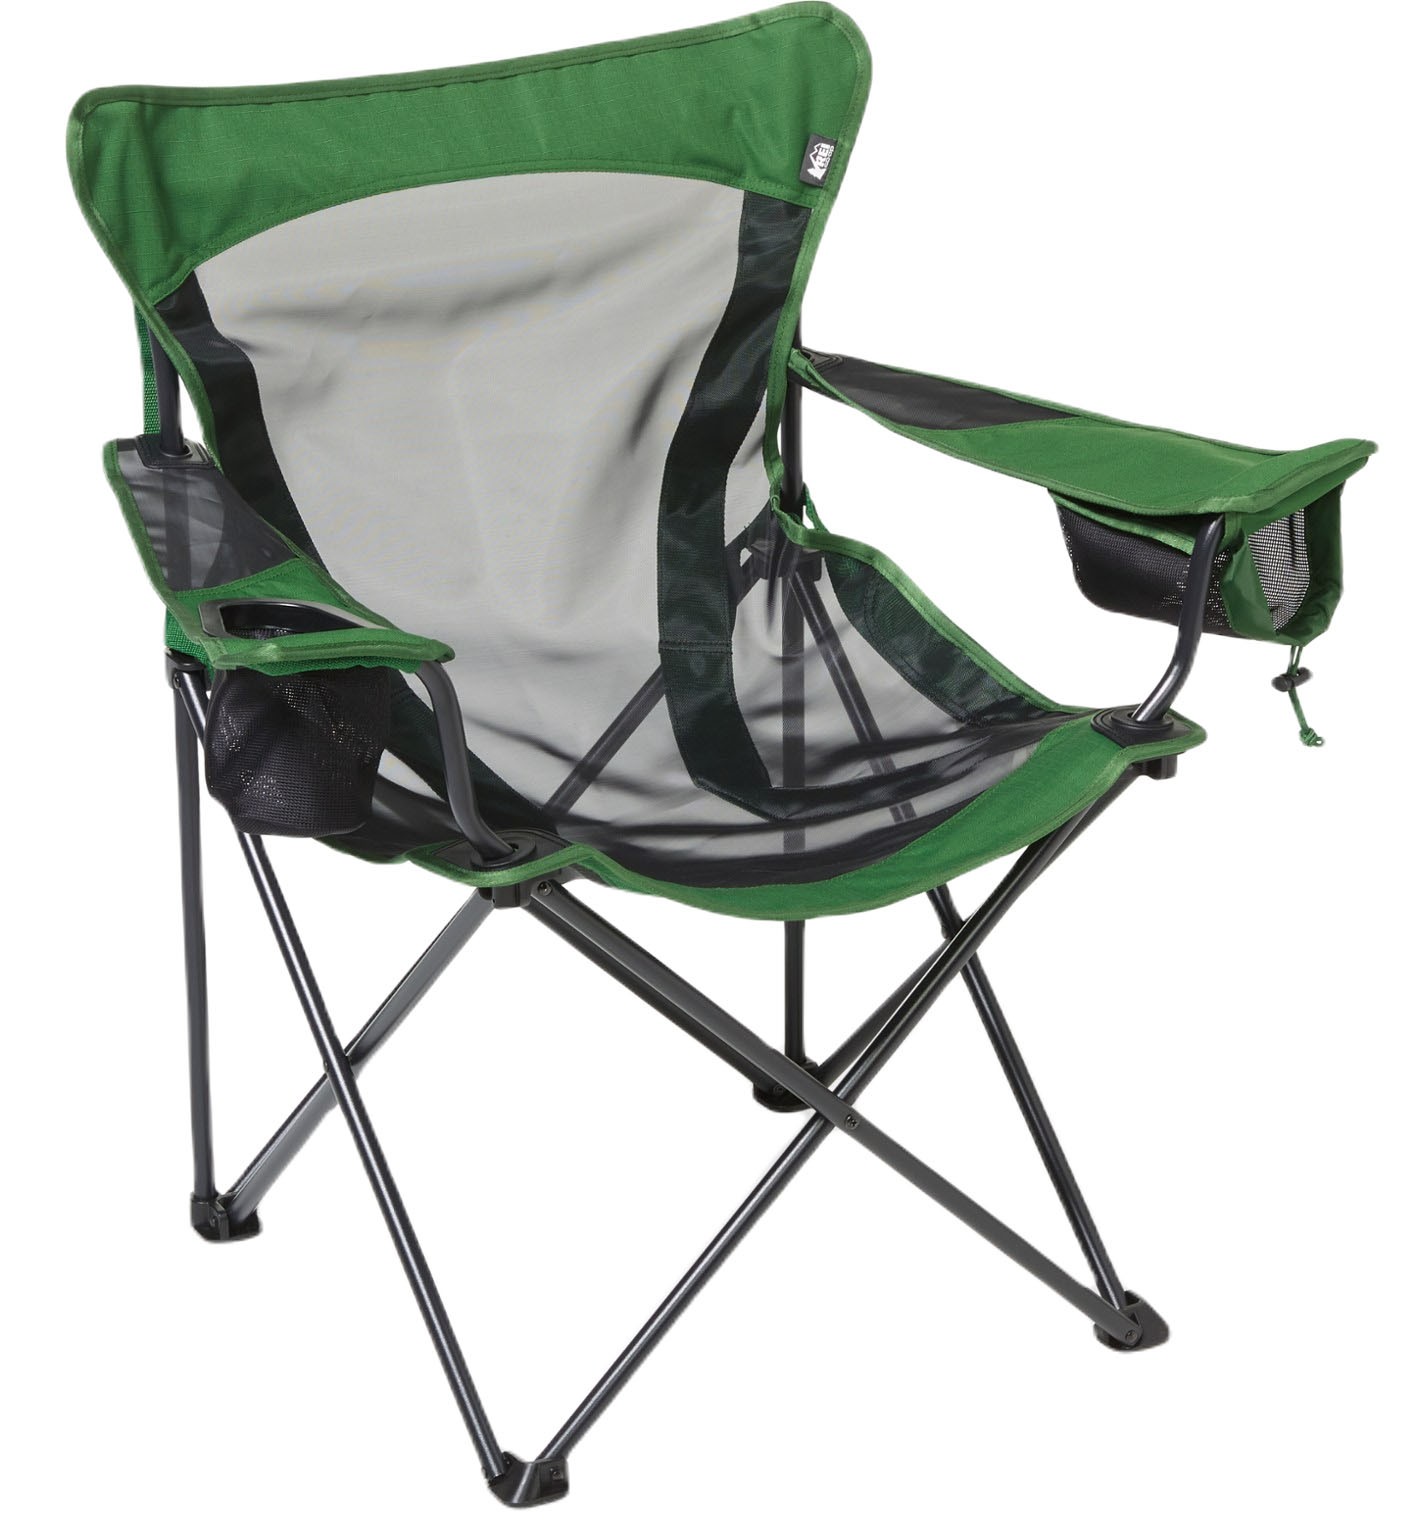 REI Co-op Campwell camping chair